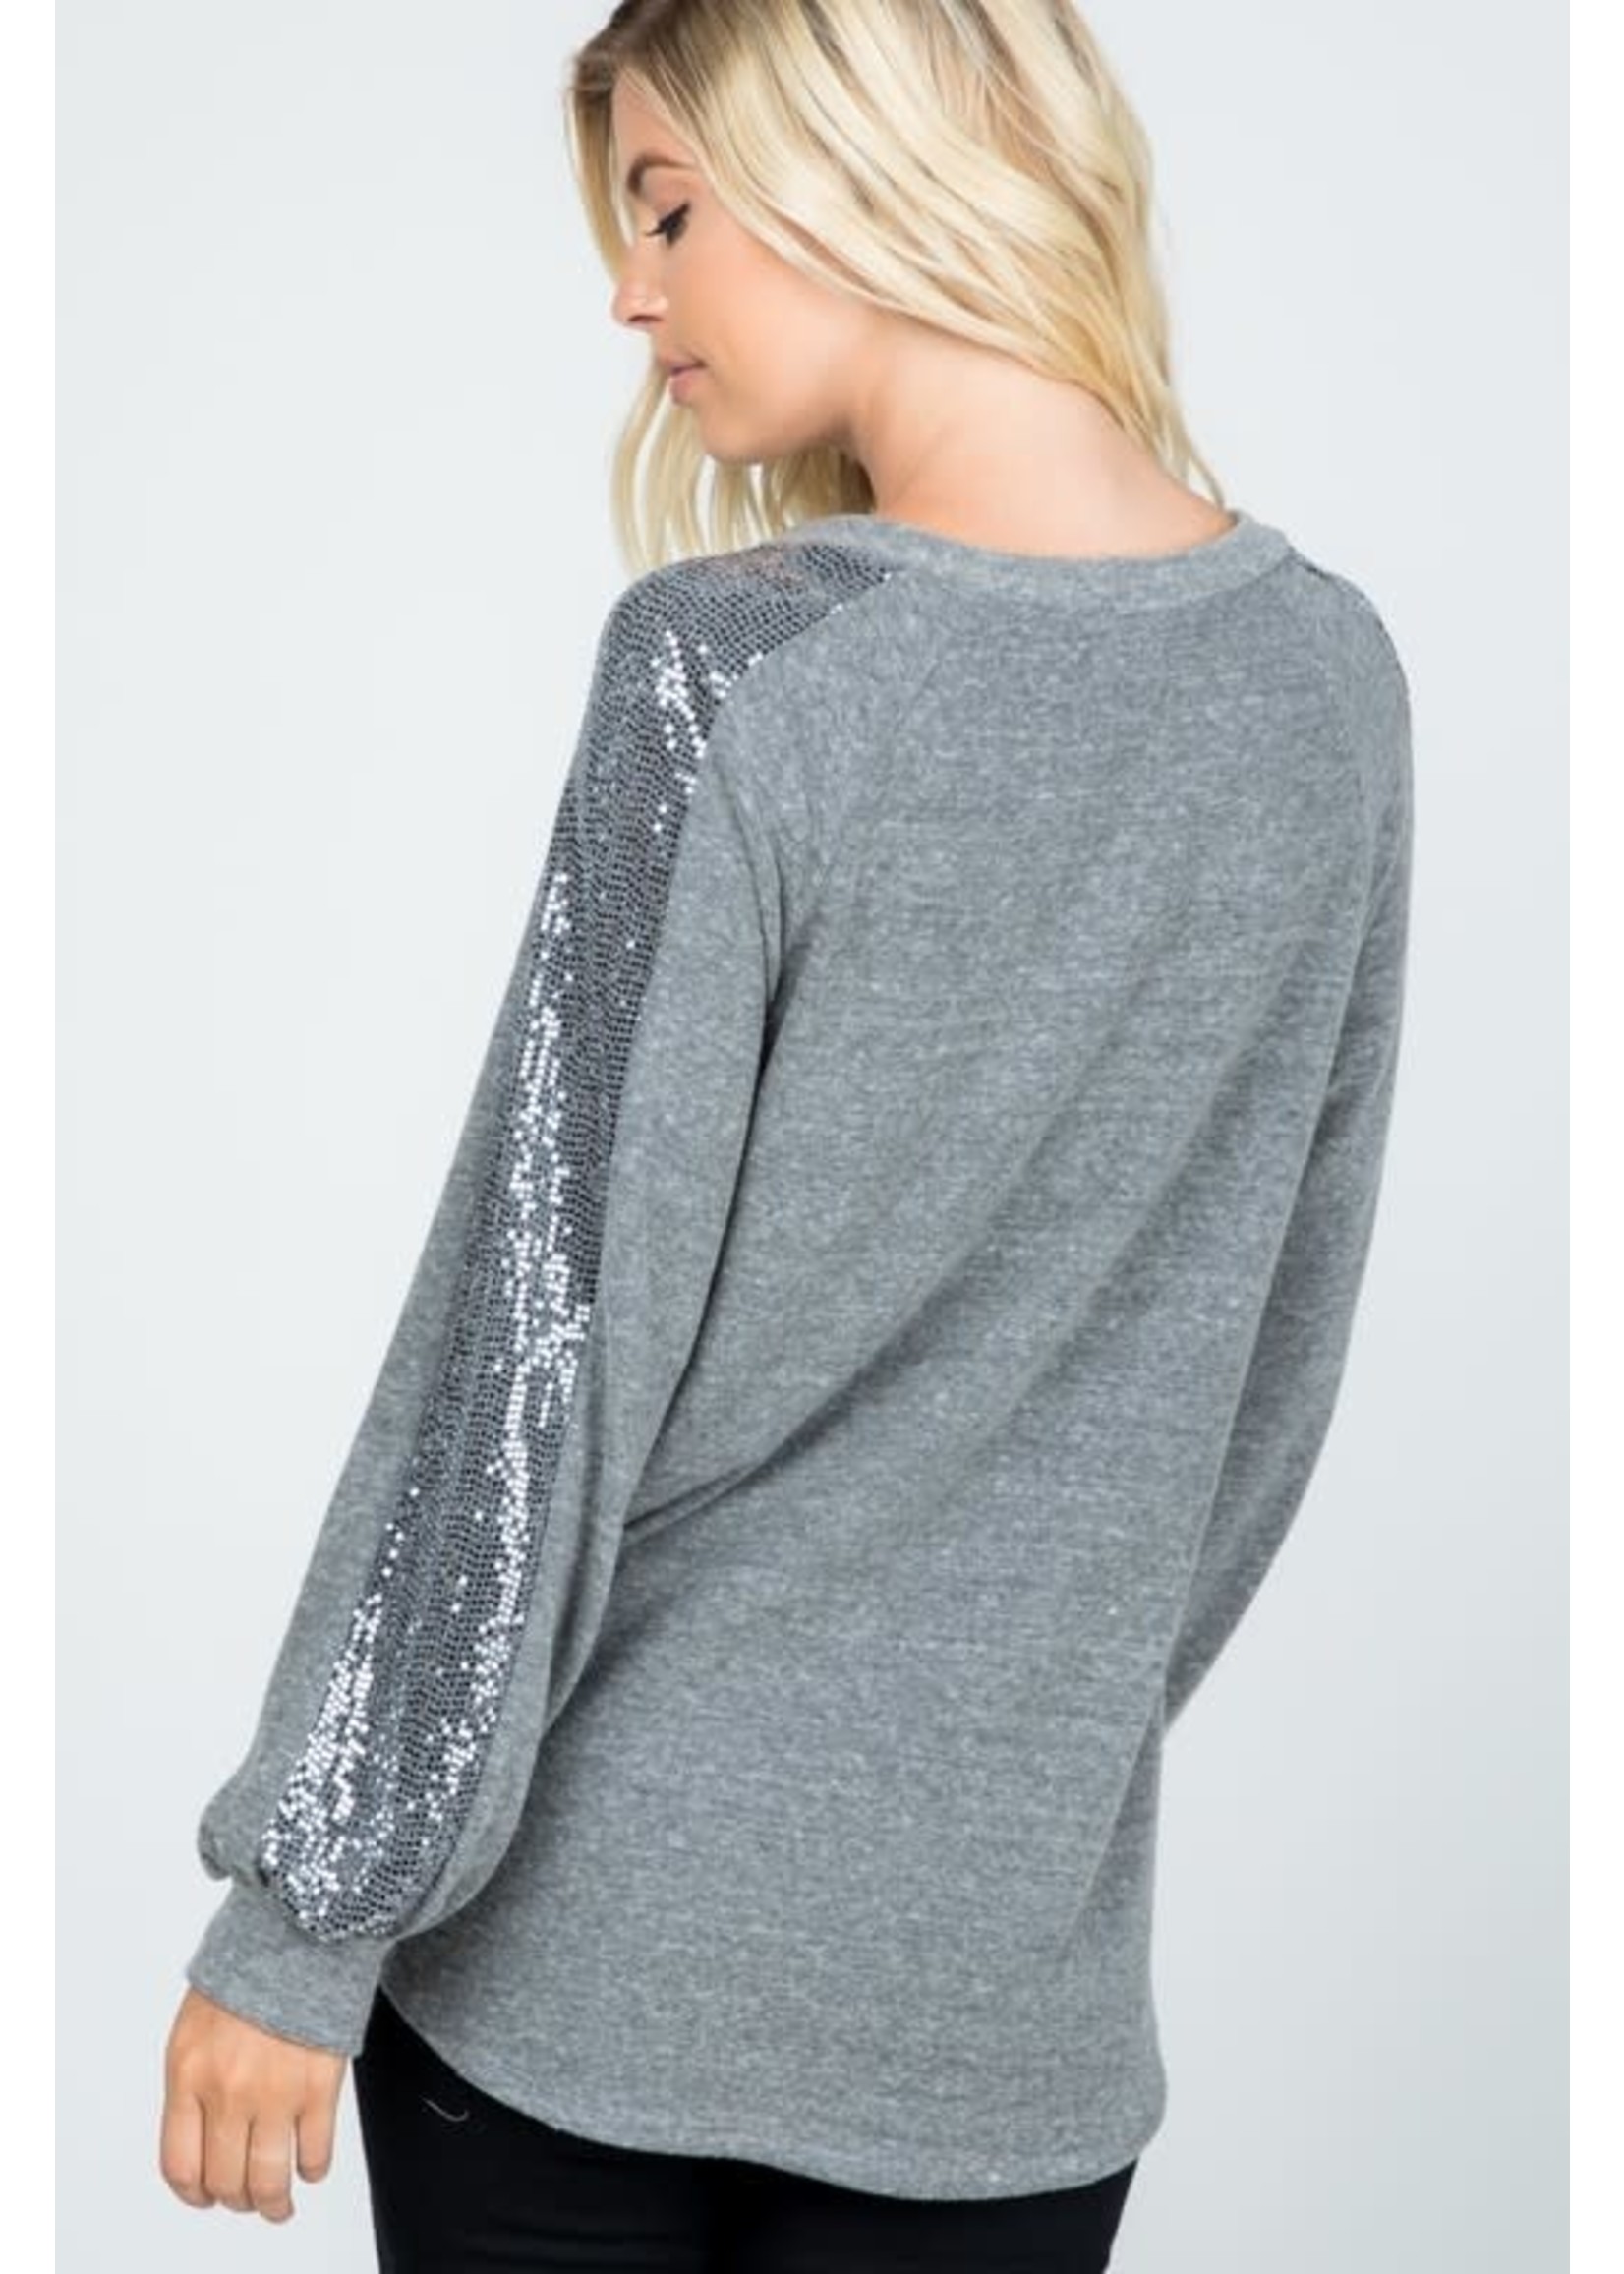 Grey Brushed Sweater Sequence Top